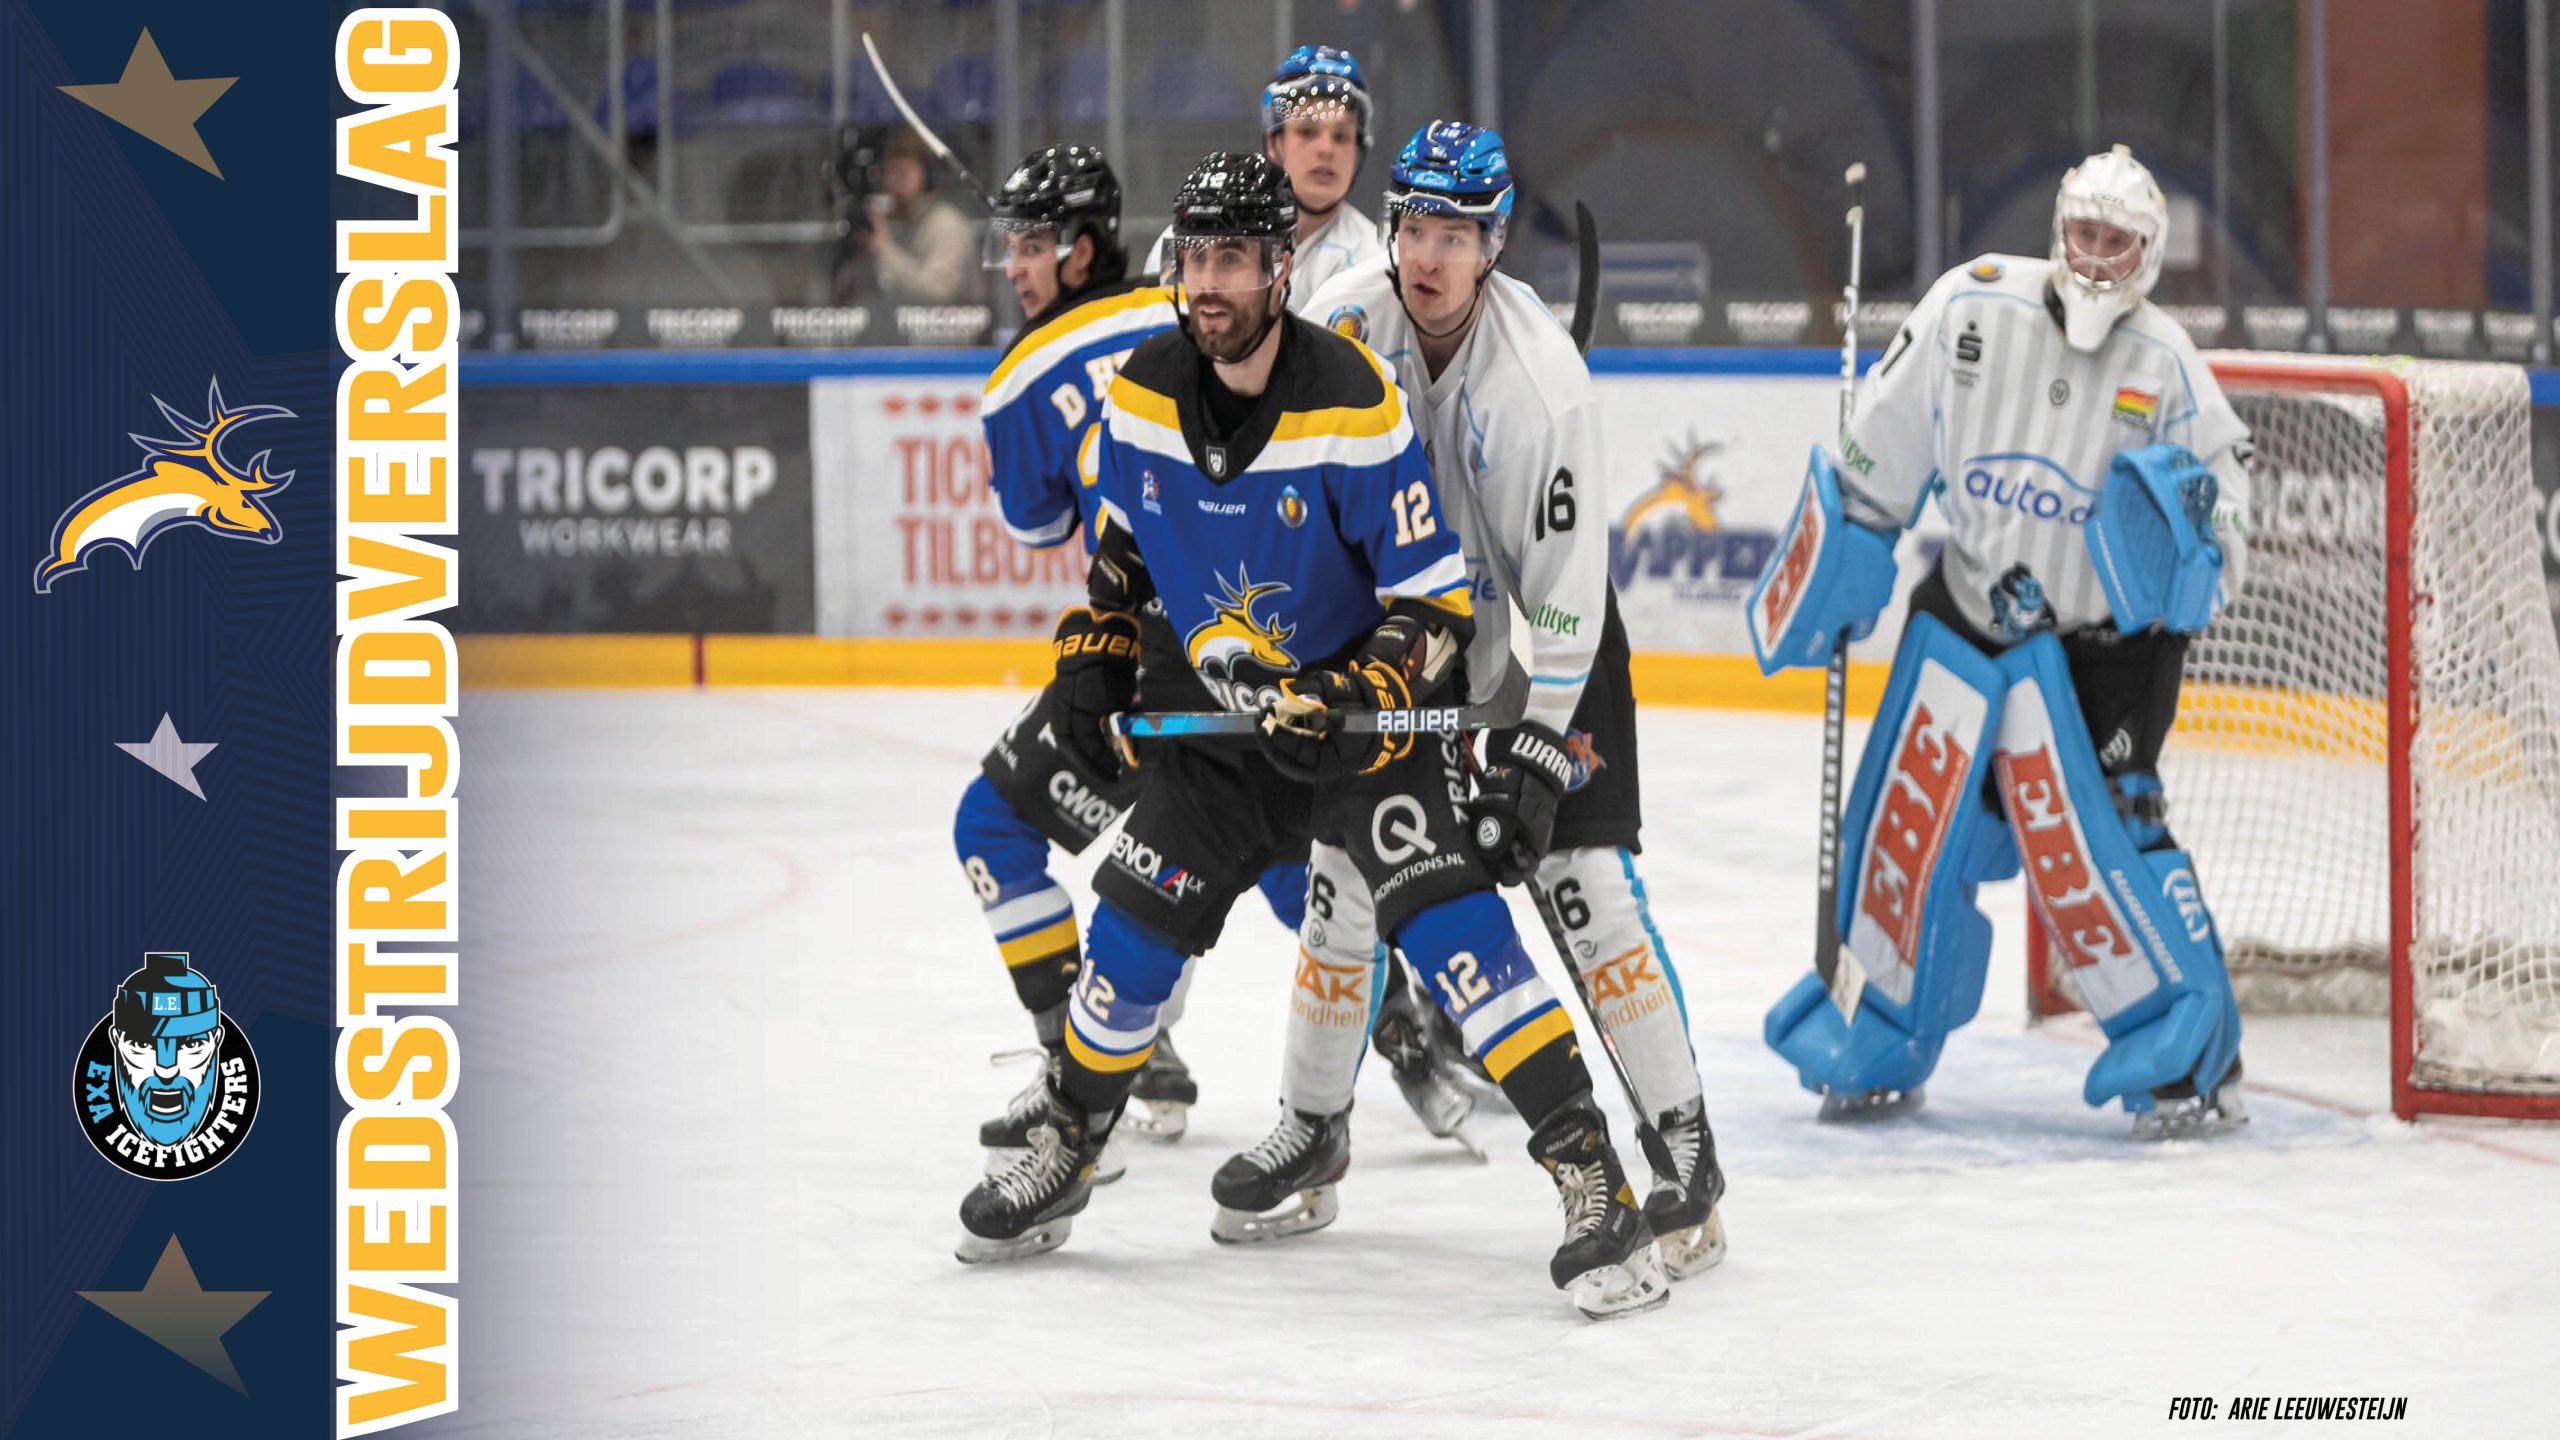 Tilburg Trappers vs. EXA Icefighters Leipzig (2-3 PS)